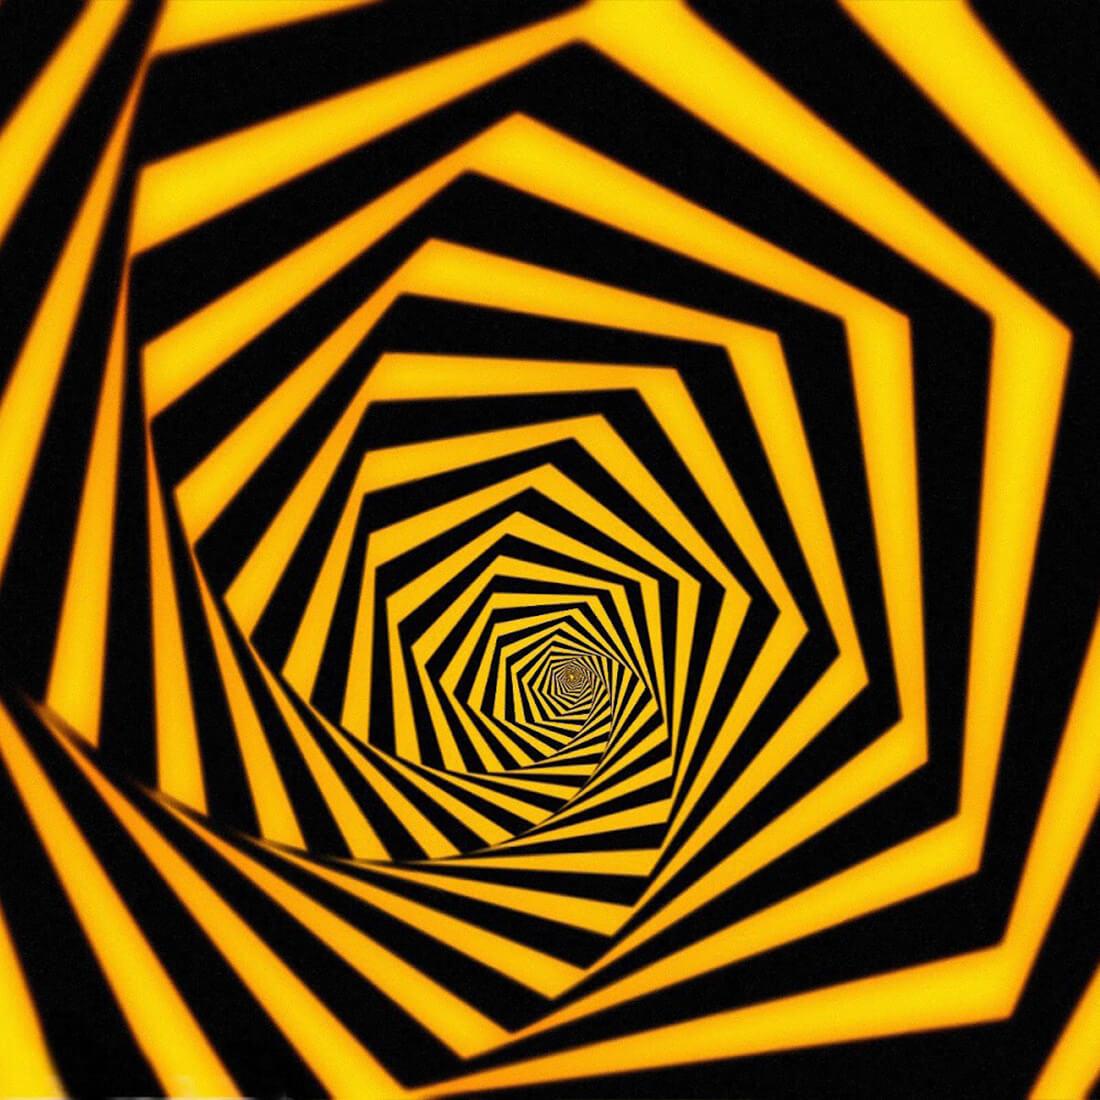 Spiral Optical Illusion Wallpapers